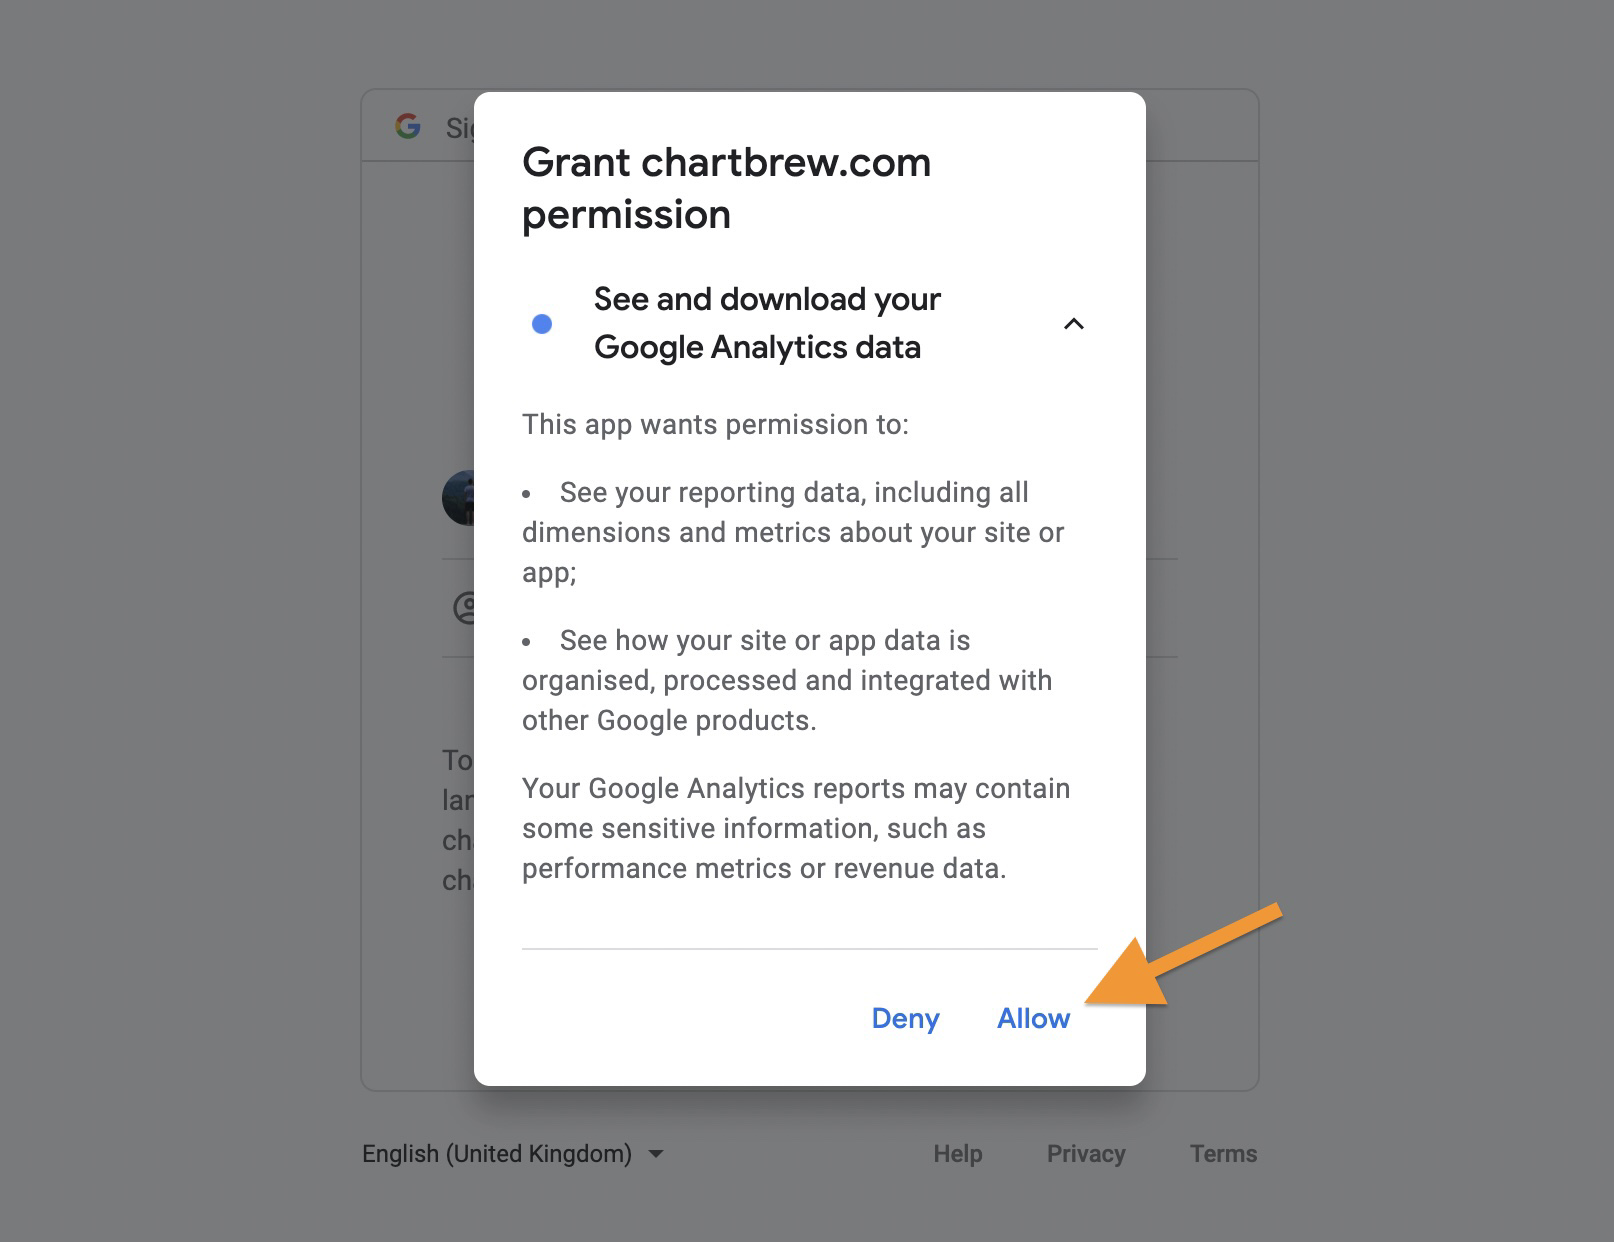 Read permissions for Chartbrew to read Google Analytics data